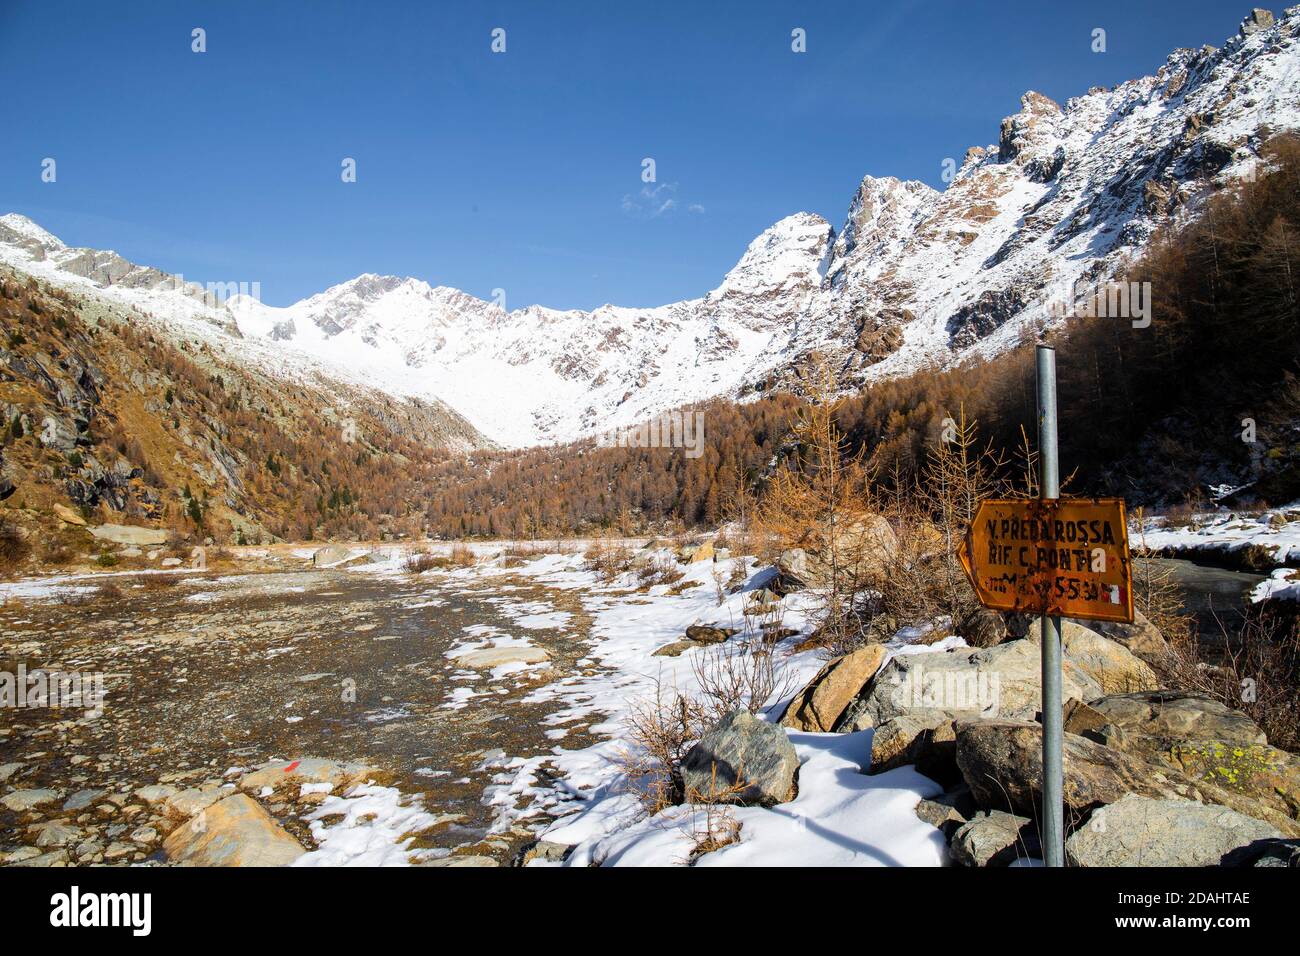 Informative sign and Mountain view from the Preda Rossa Valley in late autumn, with snow and orange pines on a sunny day. Val Masino, Lombardy, Italy. Stock Photo